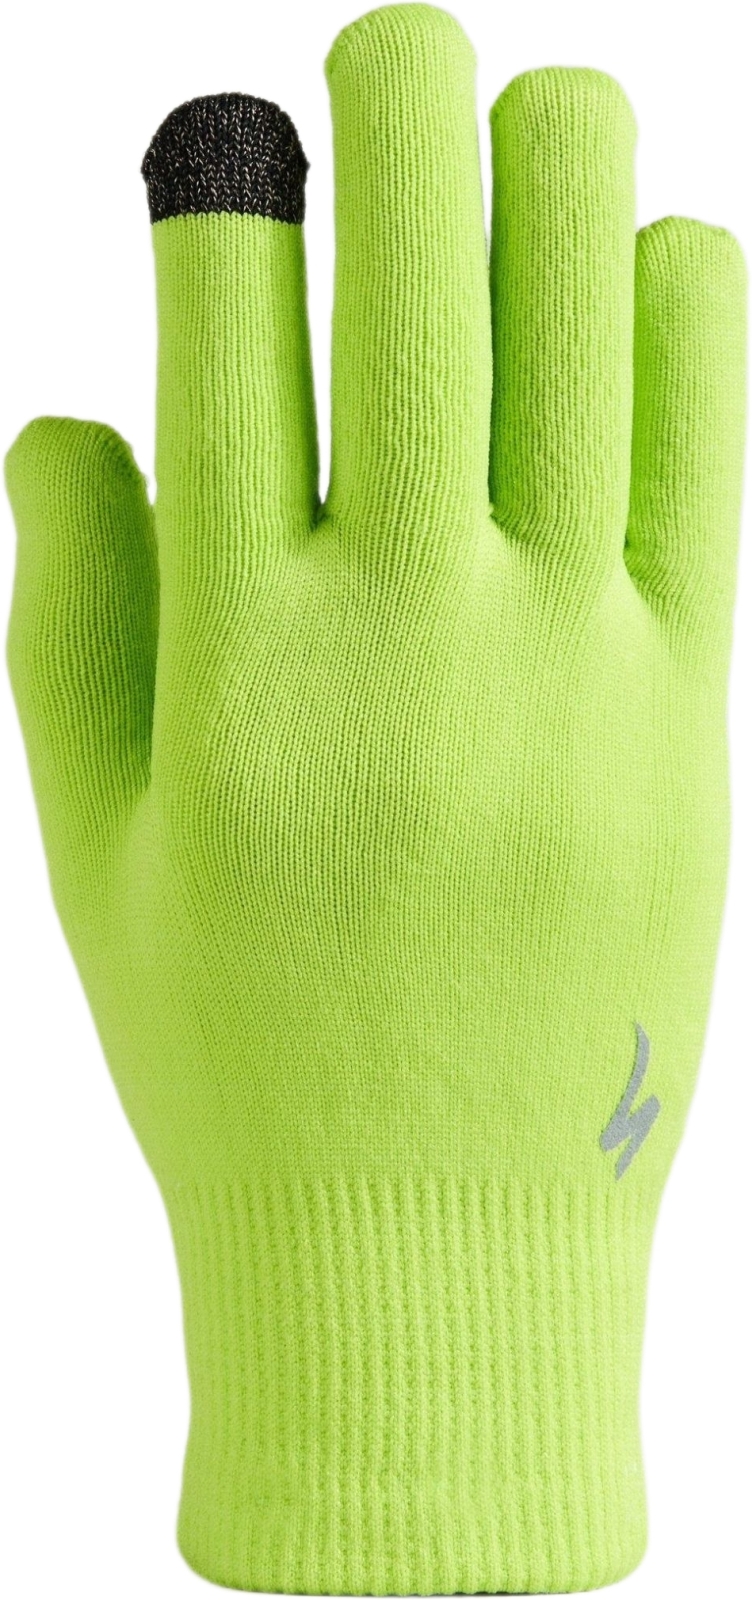 E-shop Specialized Thermal Knit Glove - hyper green S